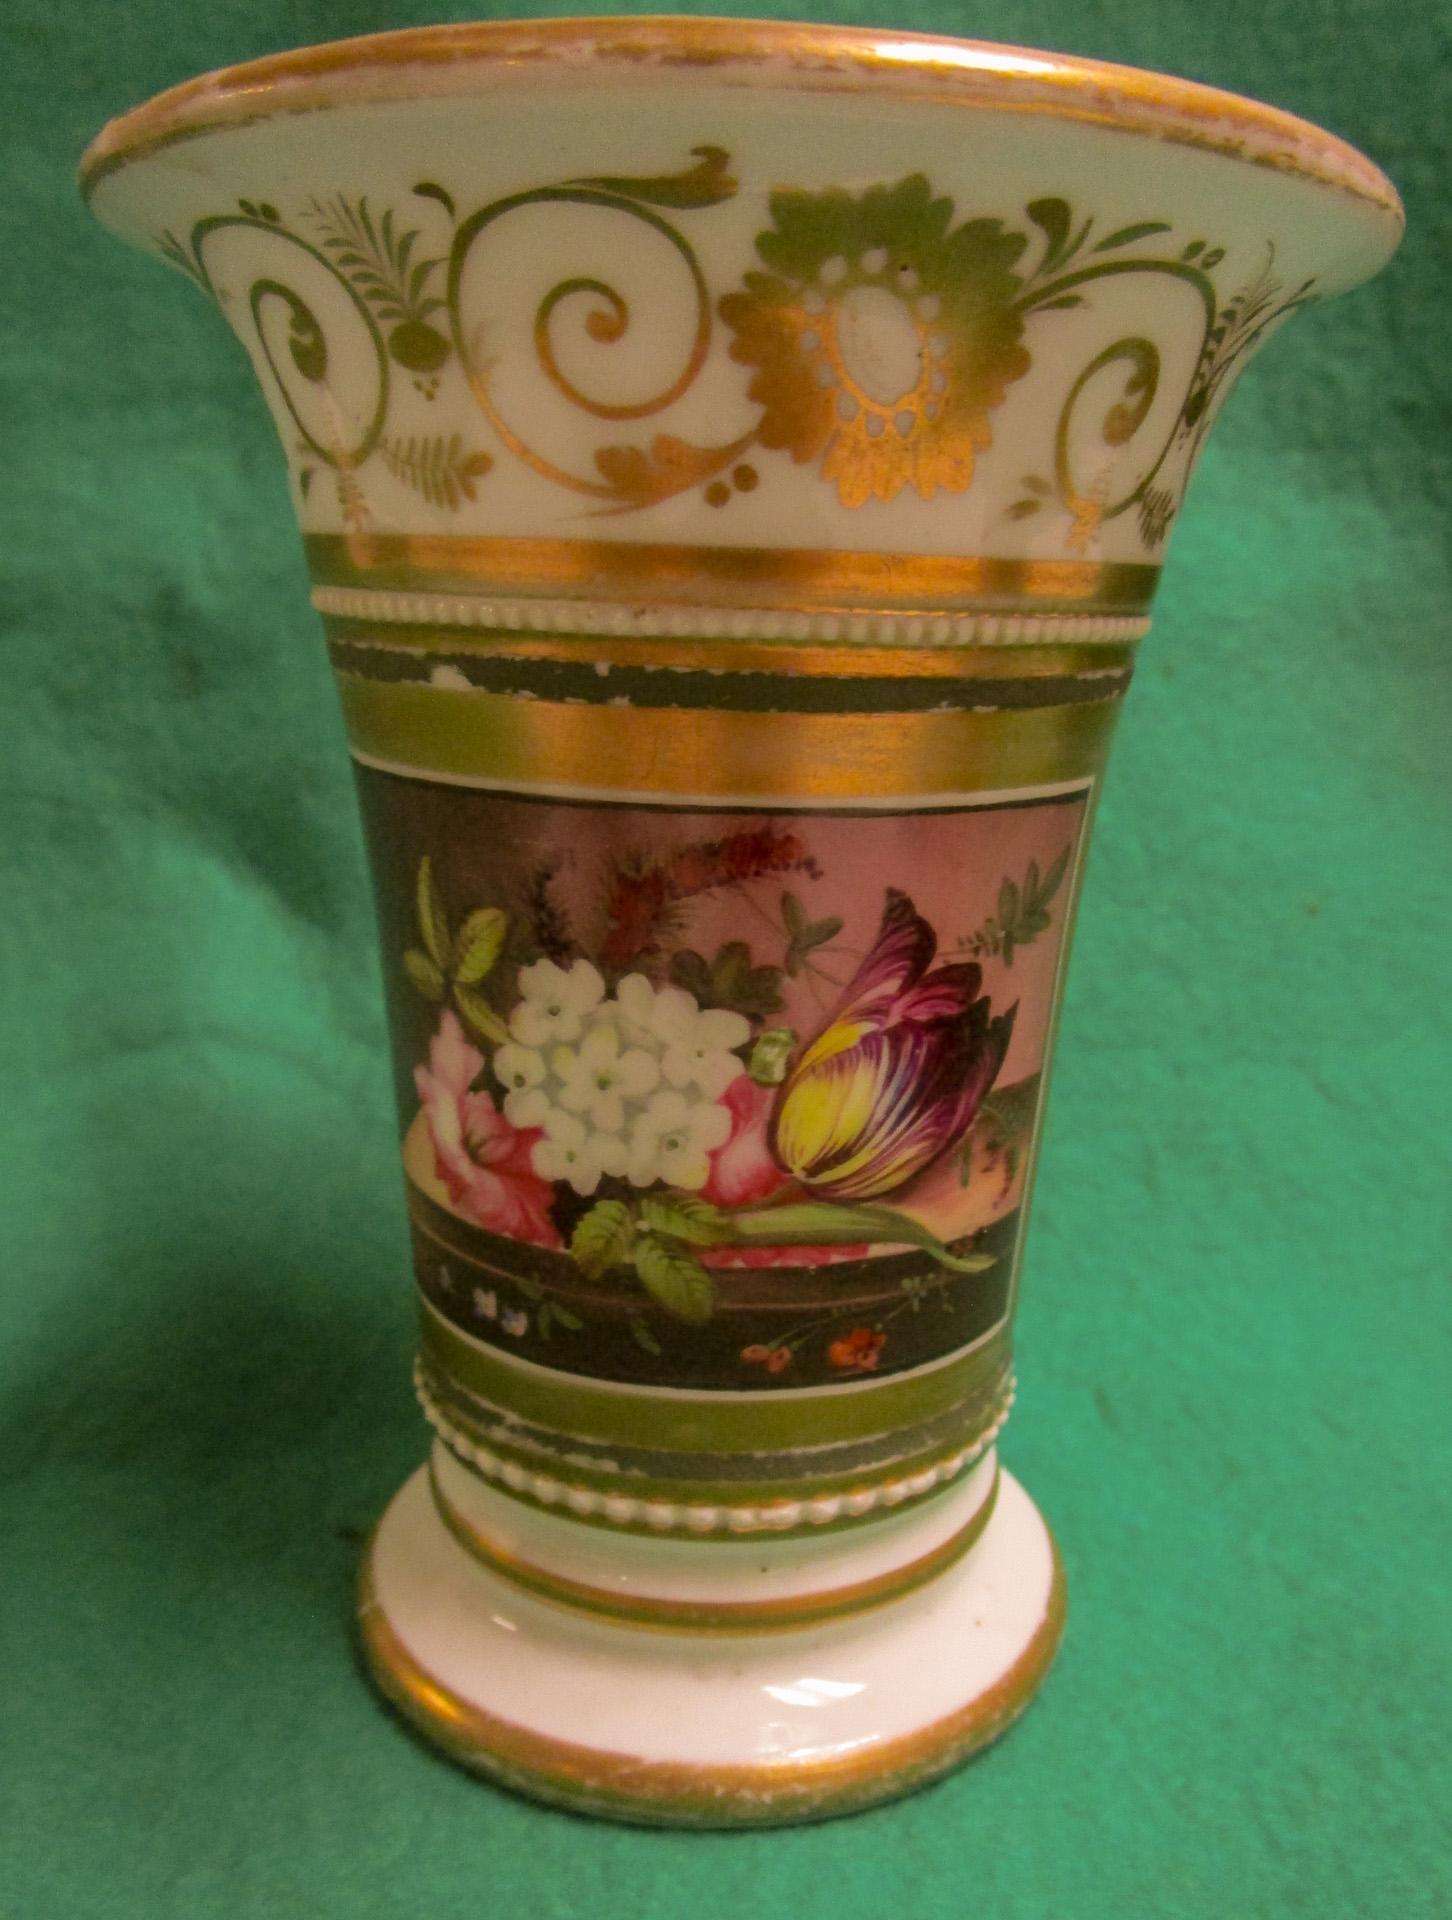 This exquisite petite pair of Regency Period hand-painted Old Paris porcelain spill vases feature two seperate displays of delicate flowers. One depicts spring jonquils, a pink rose, blue columbine, bell flower and for-get-me-nots. The other a